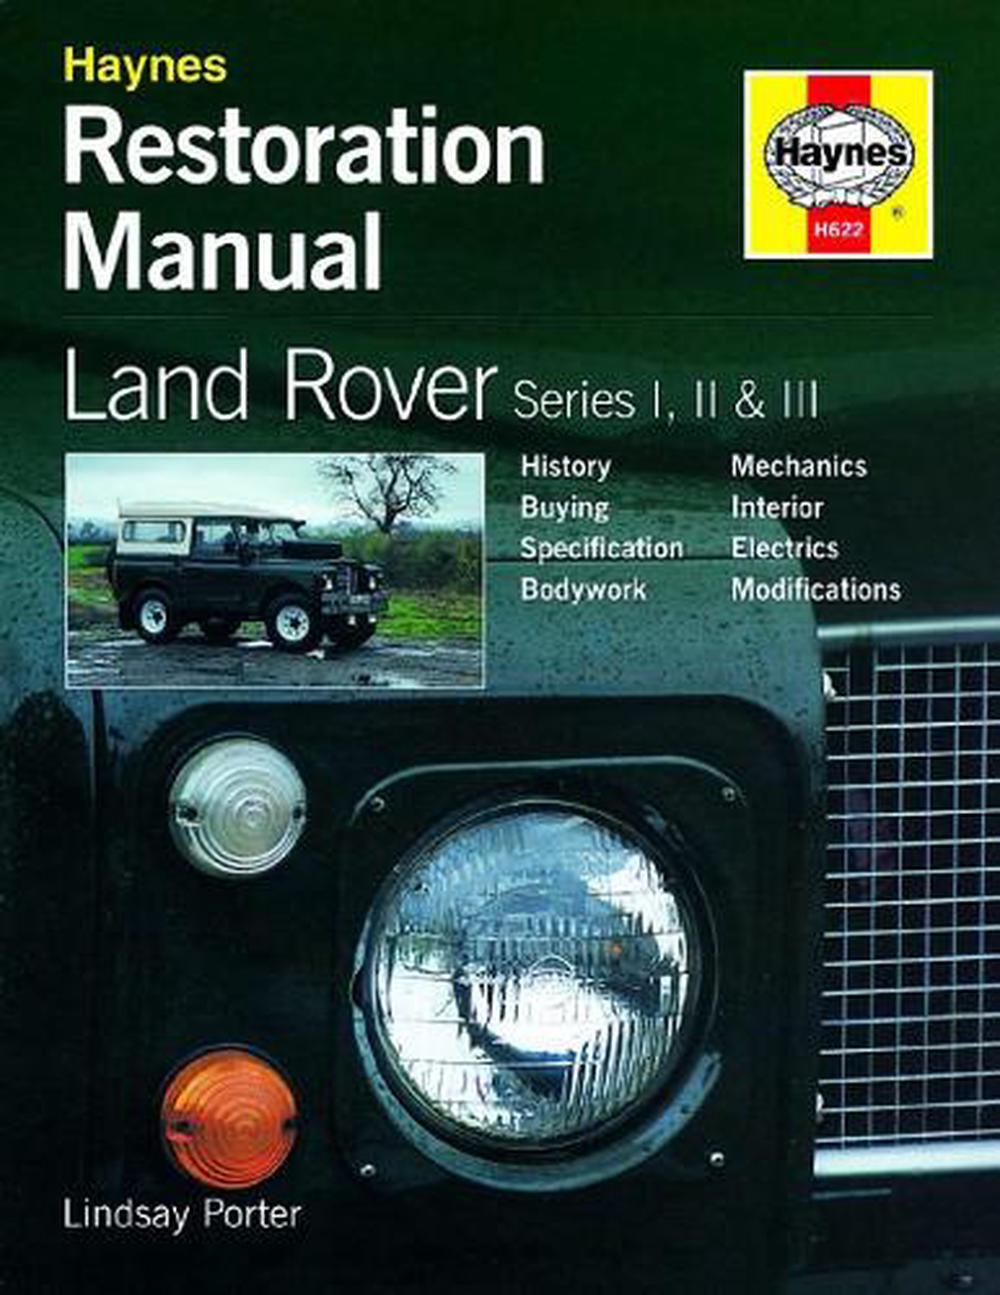 Land Rover Series I, II and III Restoration Manual by Lindsay Porter, Hardcover, 9781859606223